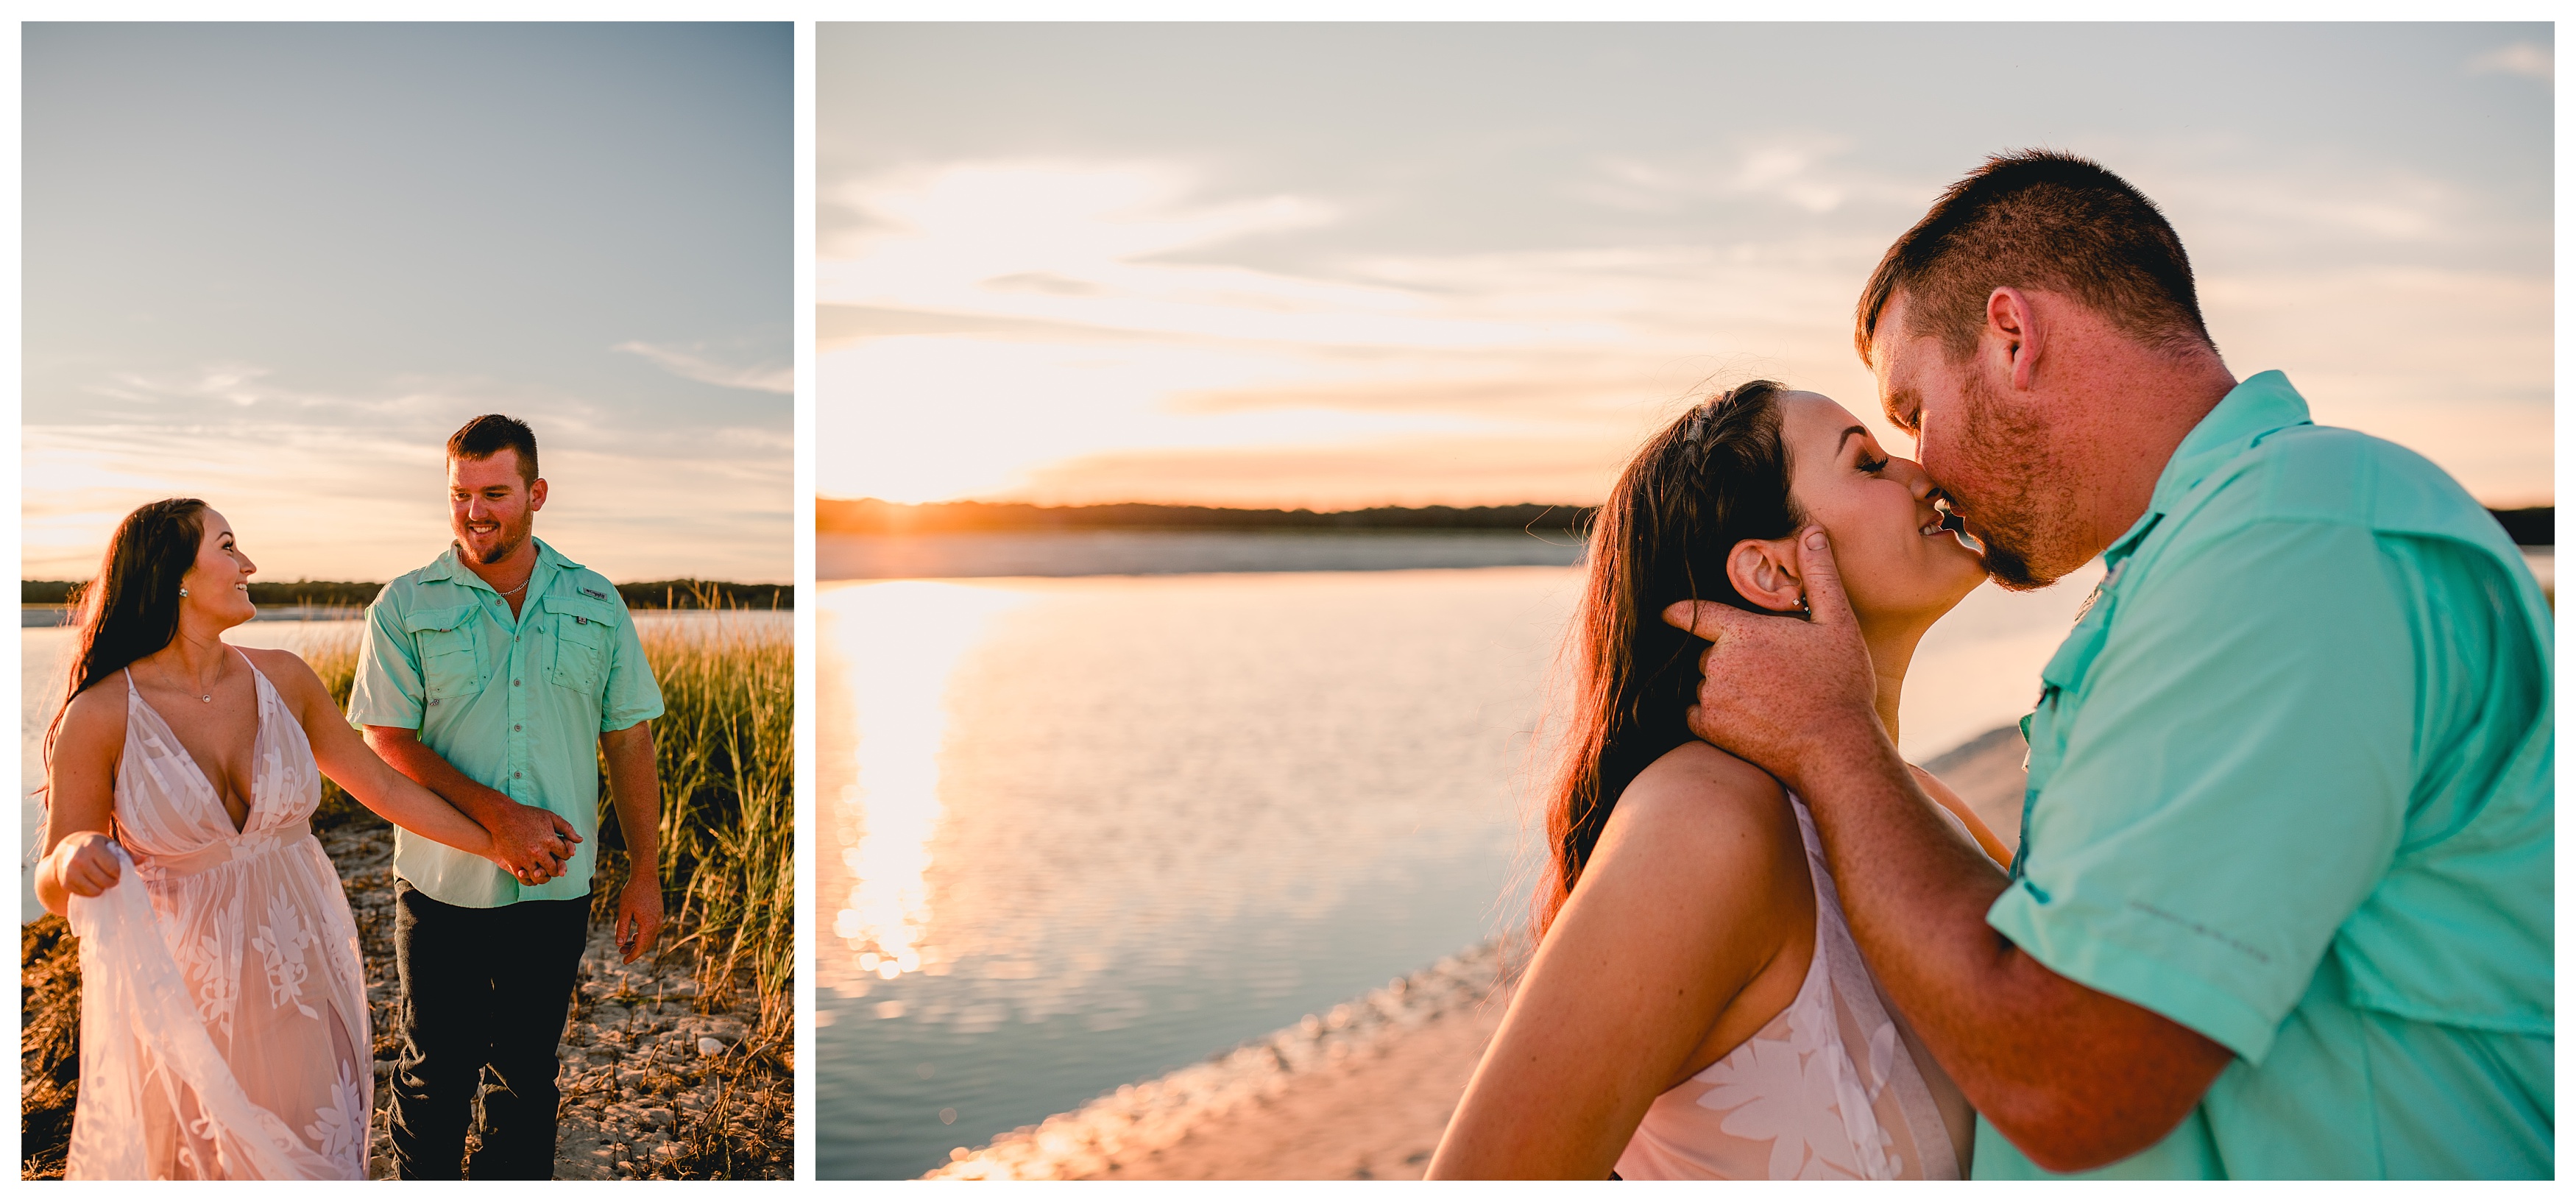 Fun engagement photos taken by professional photographer. Shelly Williams Photography